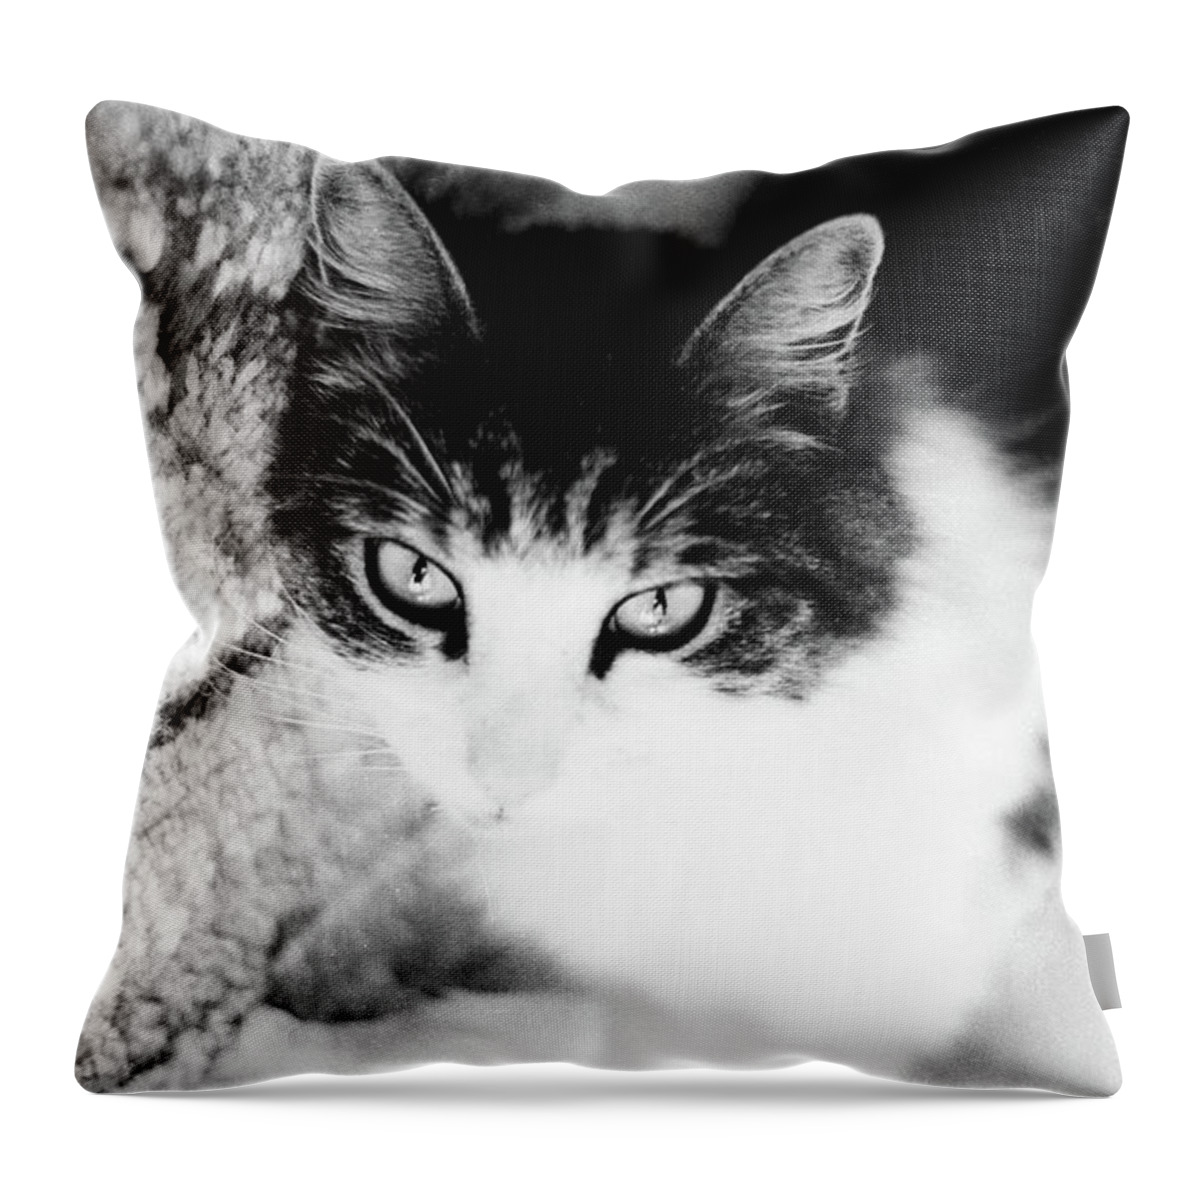 Cat Throw Pillow featuring the photograph Sultry Feline by Geoff Jewett